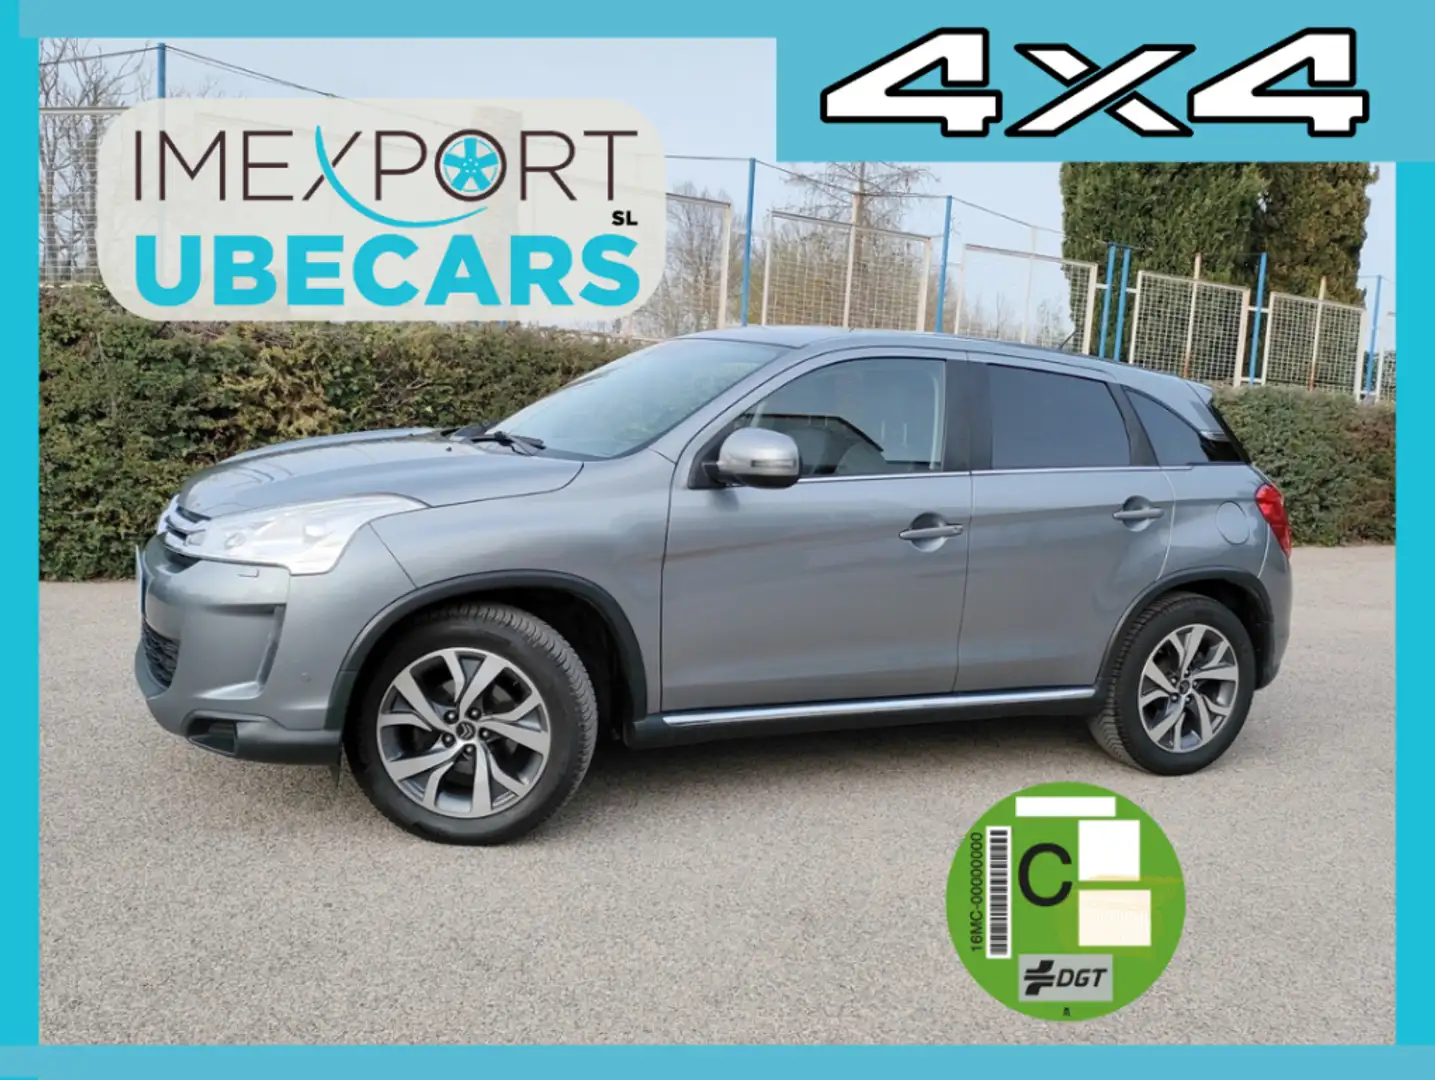 Citroen C4 Aircross 1.6HDI S&S Exclusive 4WD 115 Gri - 1